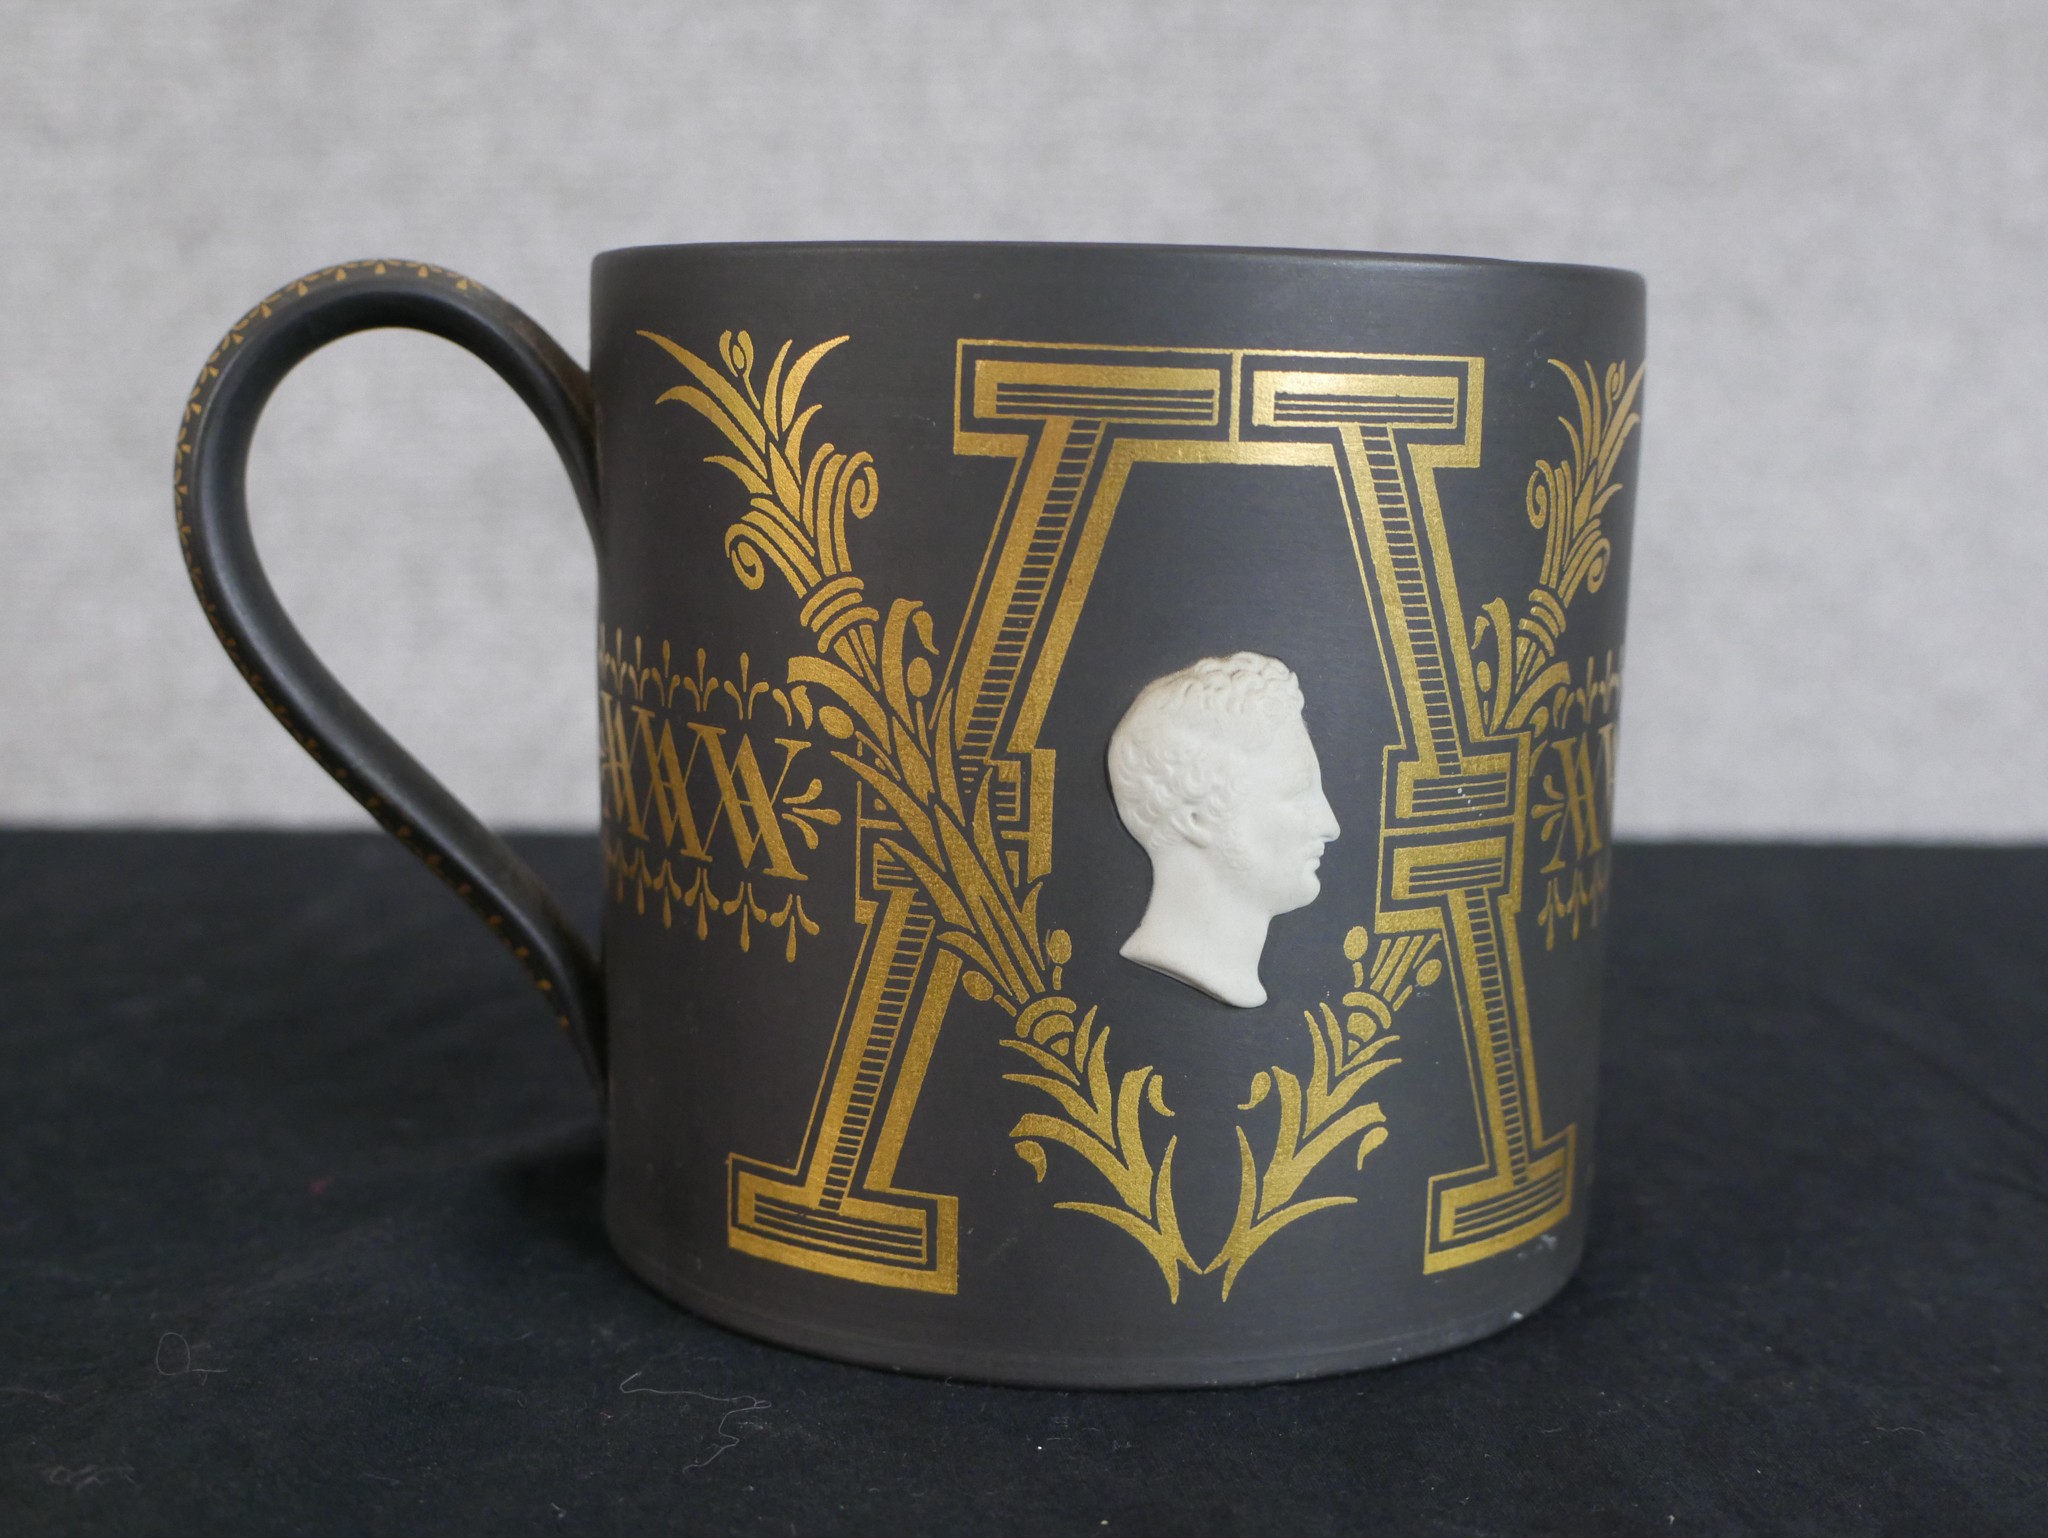 A limited edition Wedgwood porcelain 'Victoria & Albert' tankard designed by Richard Guyatt to - Image 2 of 3